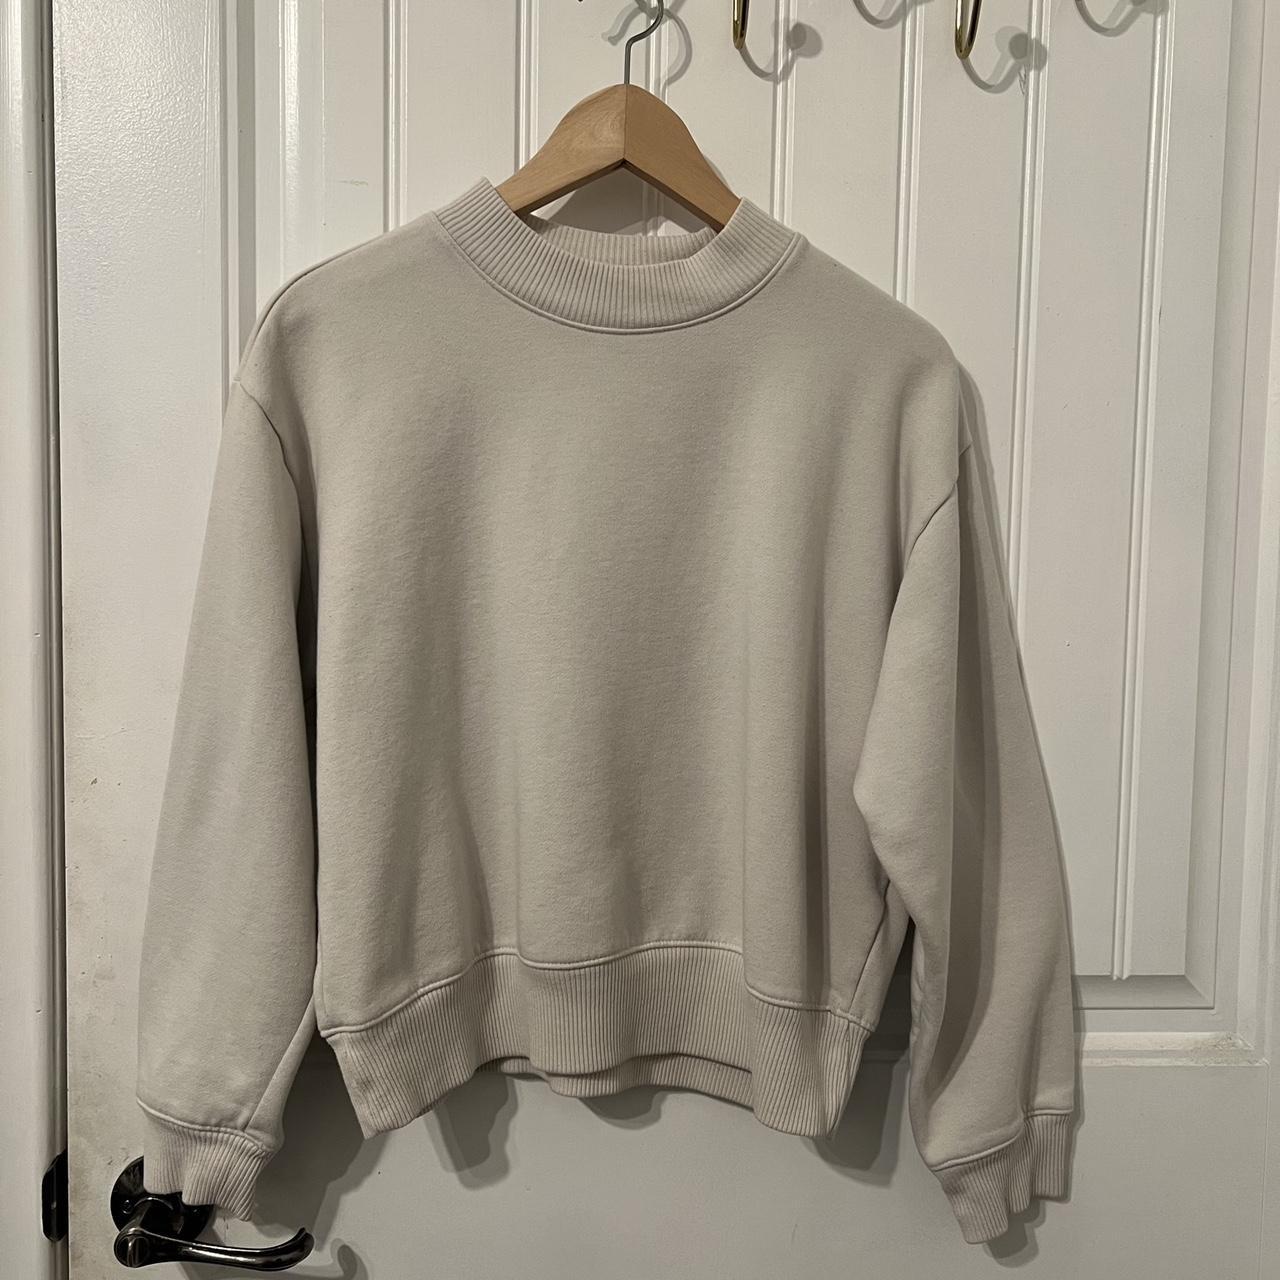 A New Day Women's Cream and White Jumper